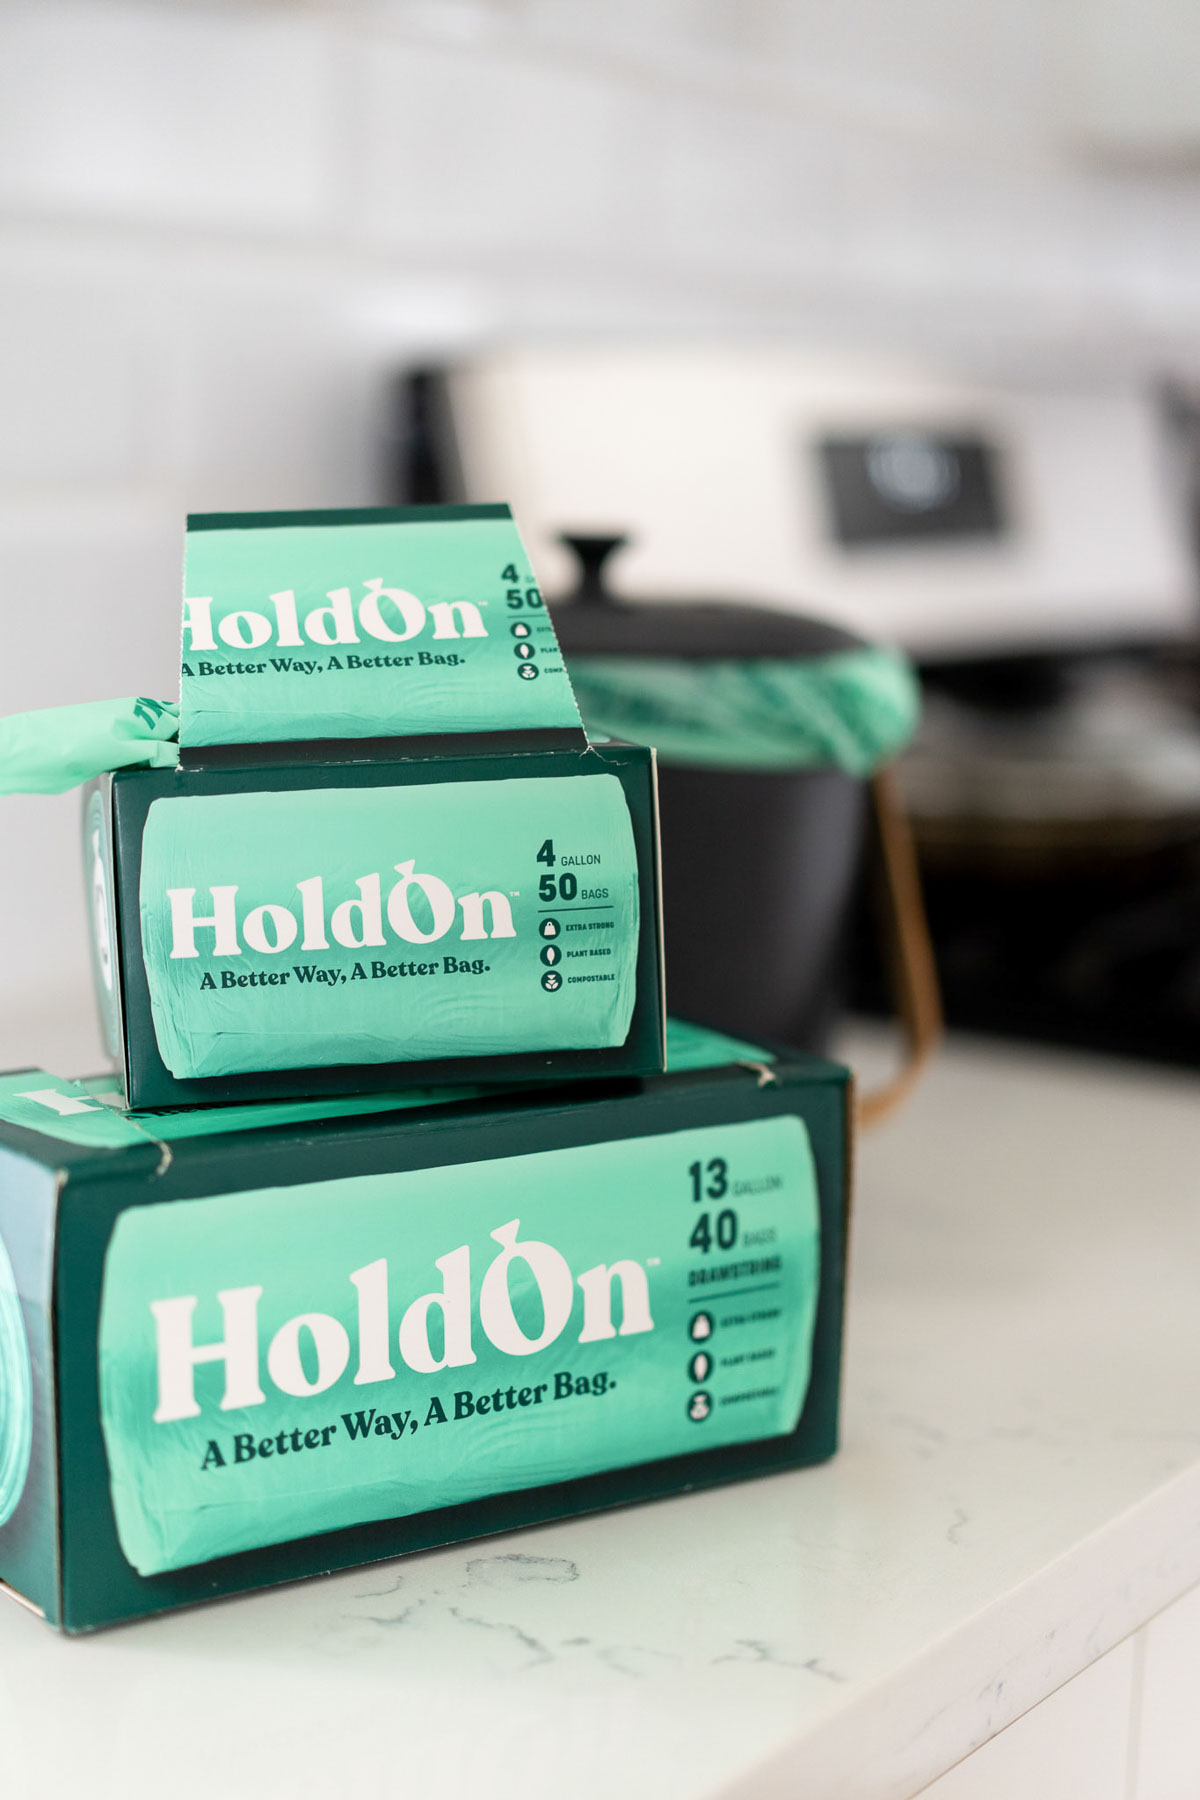 HoldOn Bags Review: Sustainable Trash Bags & Storage Bags